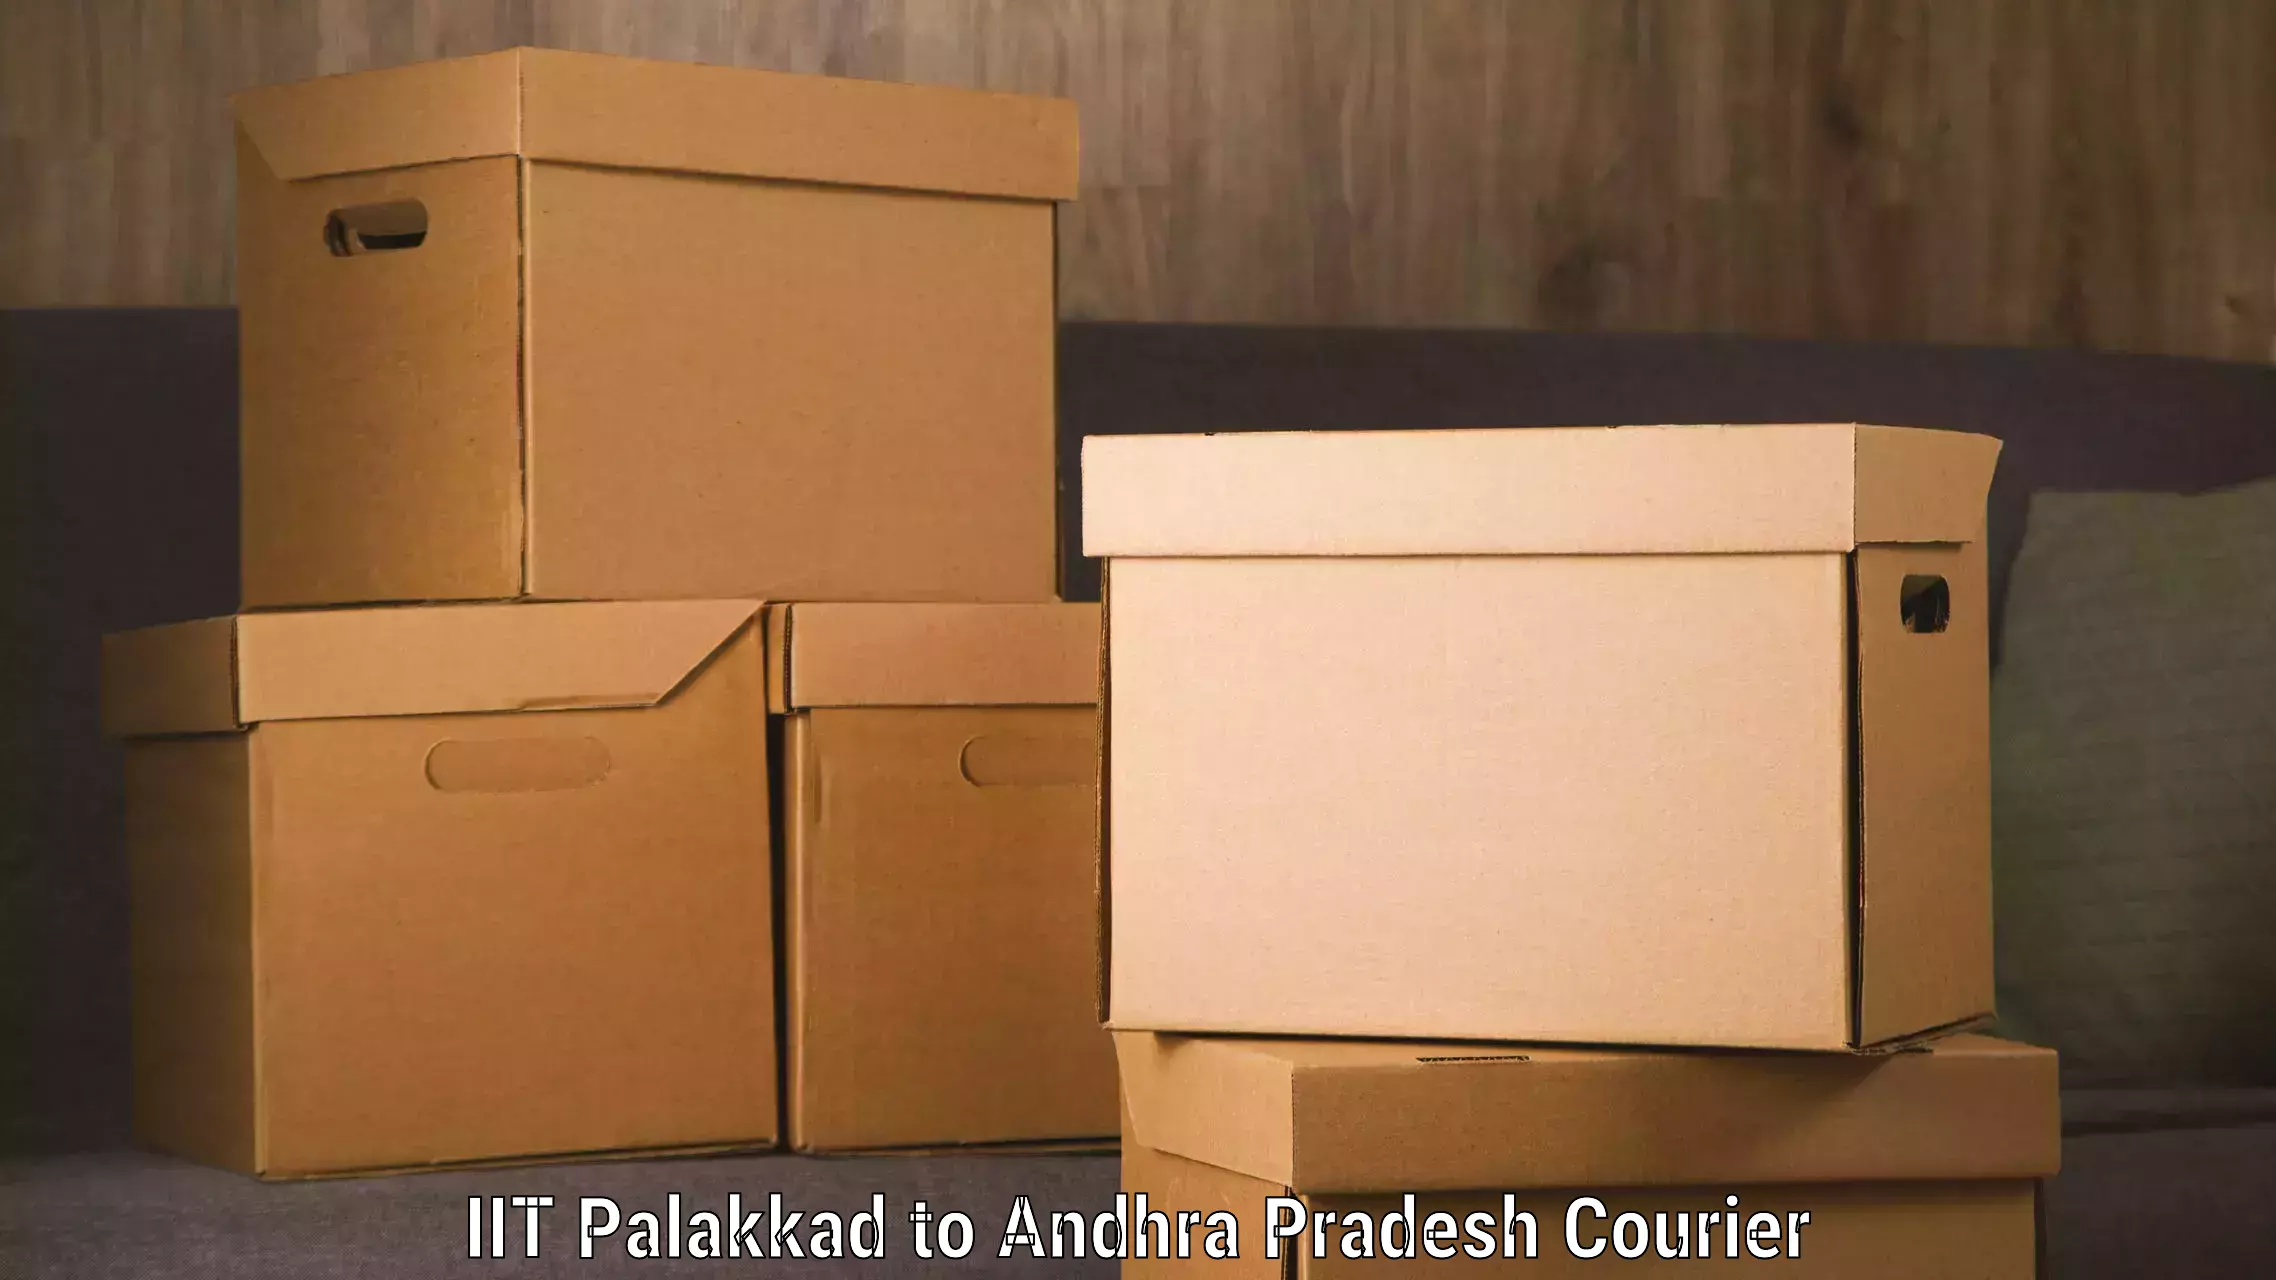 Air courier services IIT Palakkad to Giddalur